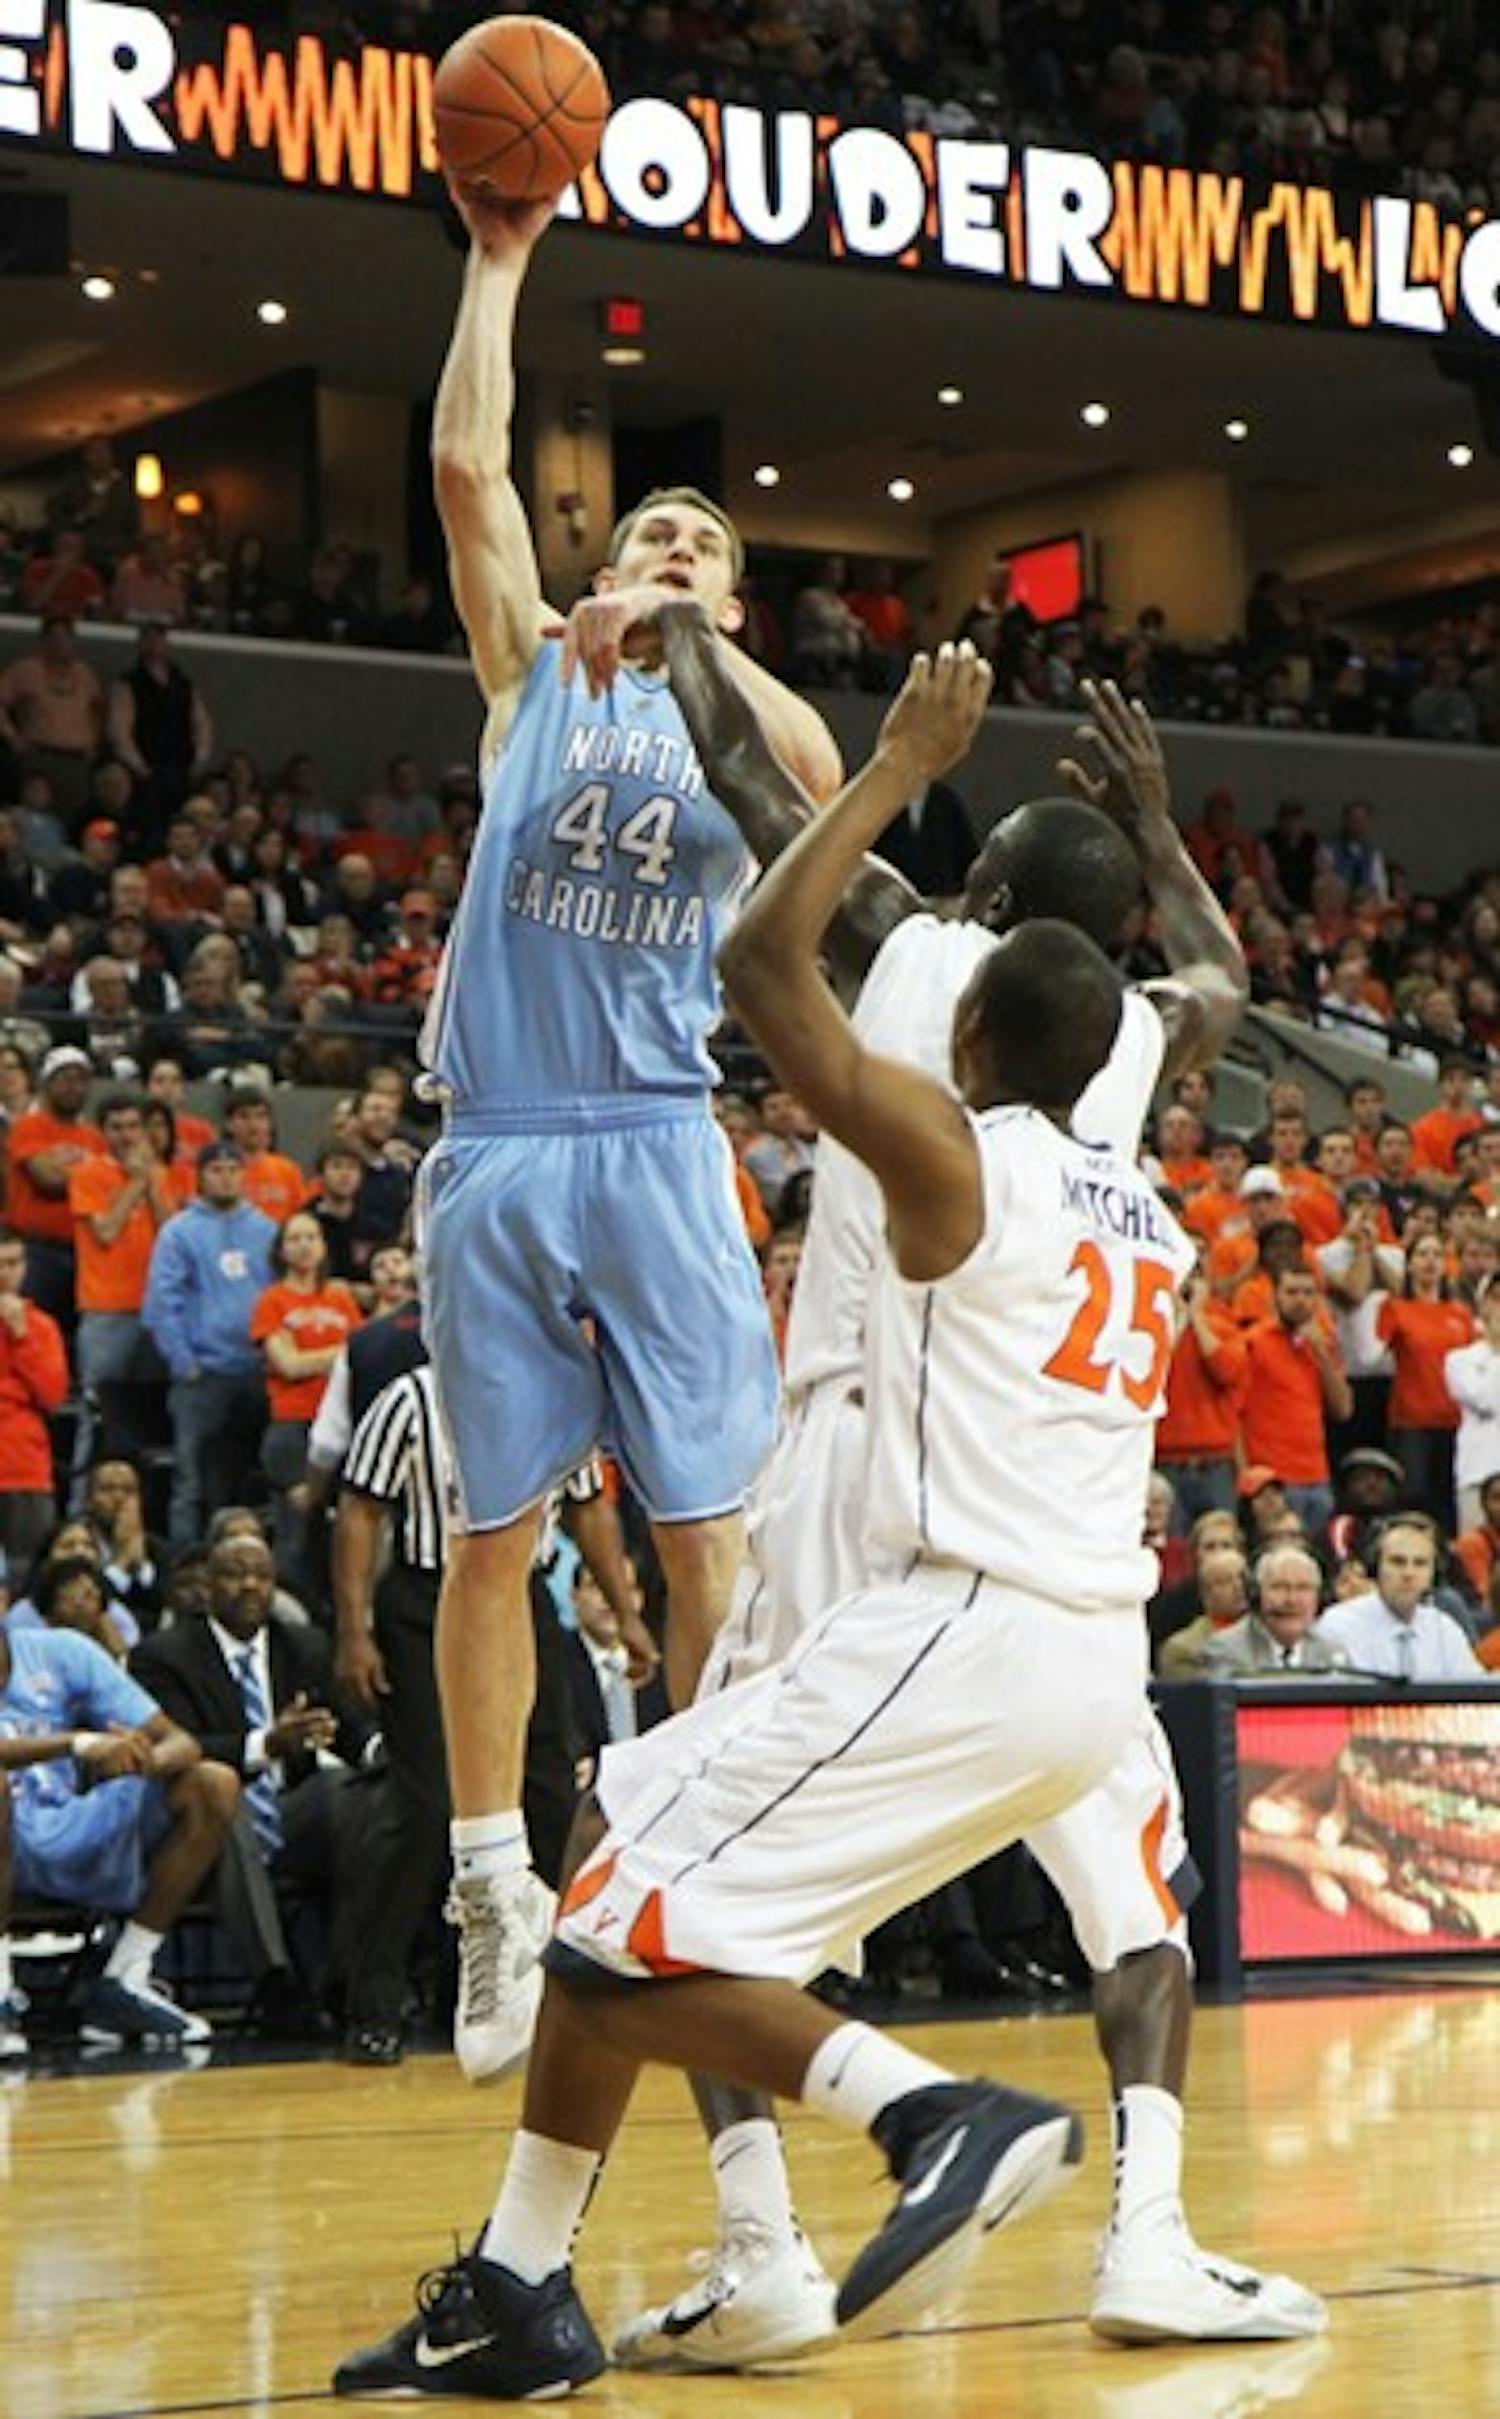 Tyler Zeller goes up for a close-range shot at UVa. His four clutch free throws tied the game late in the second half.